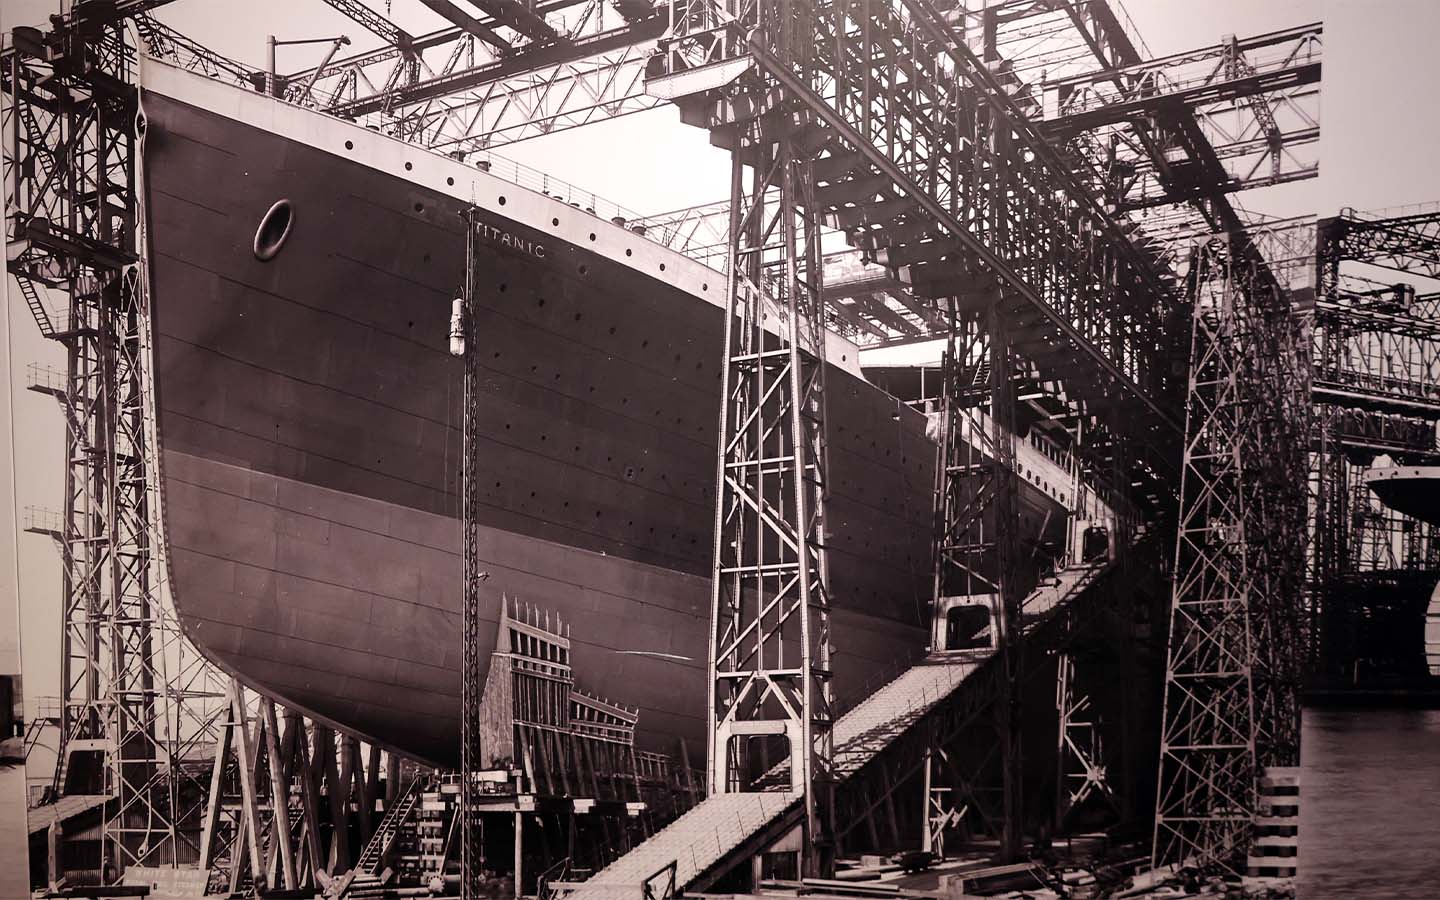 A US billionaire aims to prove that exploring the Titanic can still be done safely